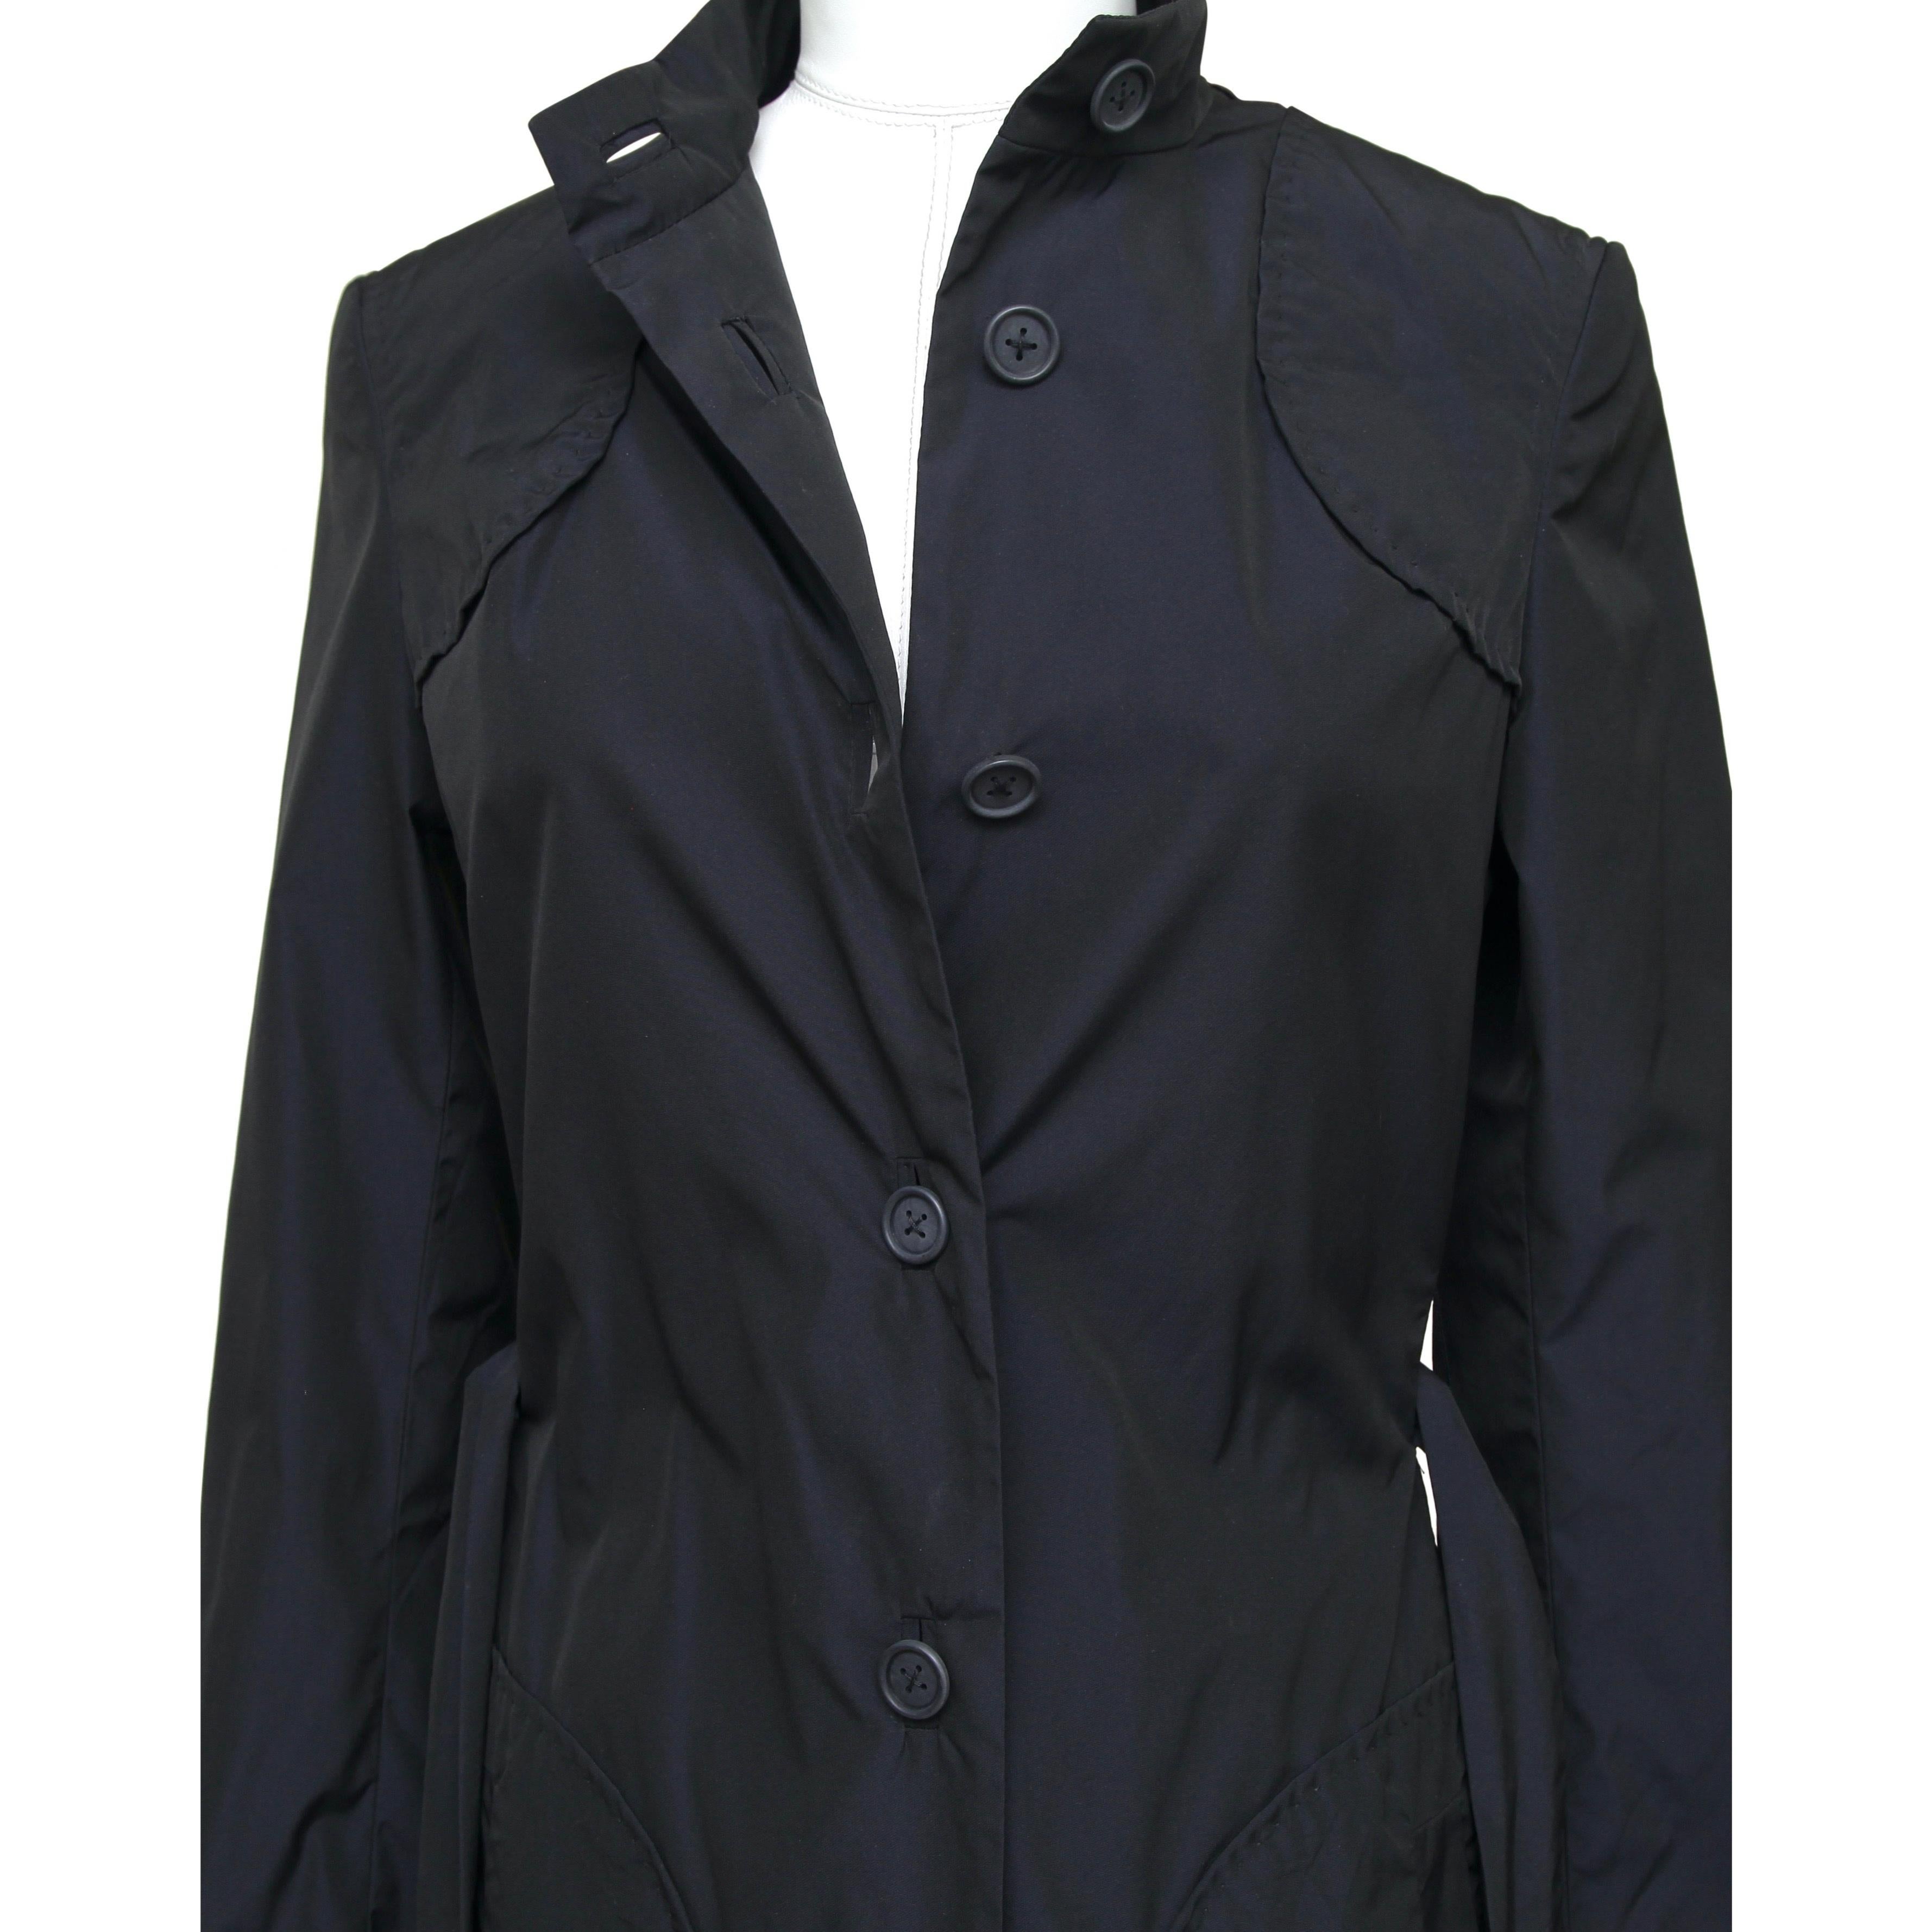 STELLA MCCARTNEY Trench Coat Navy Blue Buttons Mid-Length Belt Clothing Sz 38 In Excellent Condition For Sale In Hollywood, FL